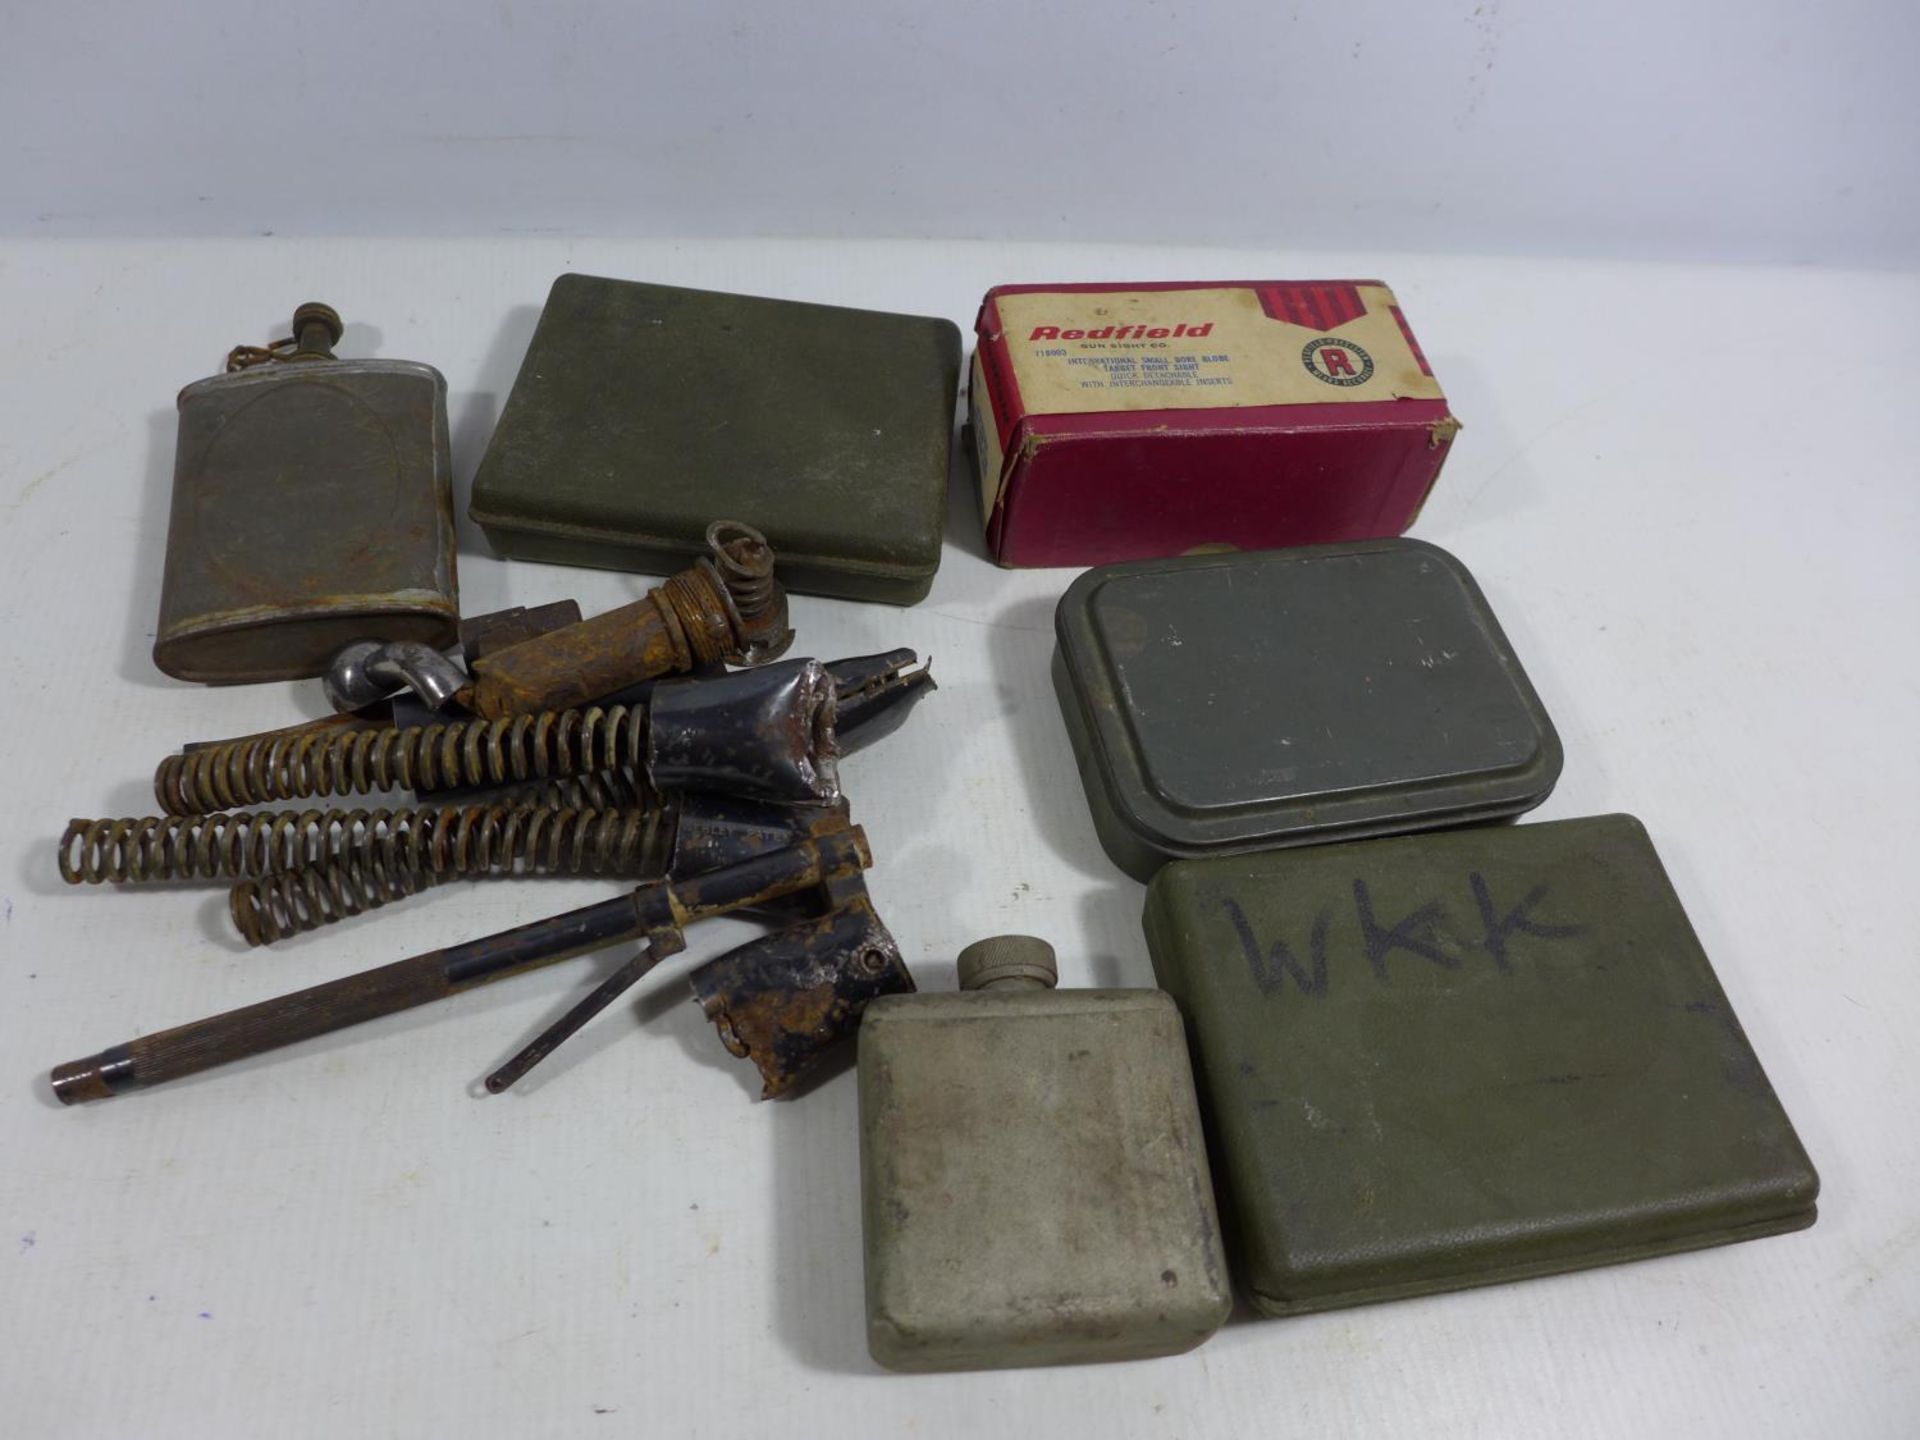 A COLLECTION OF GUN CLEANING EQUIPMENT, AIR RIFLE SPRINGS, OIL BOTTLES ETC - Image 5 of 5